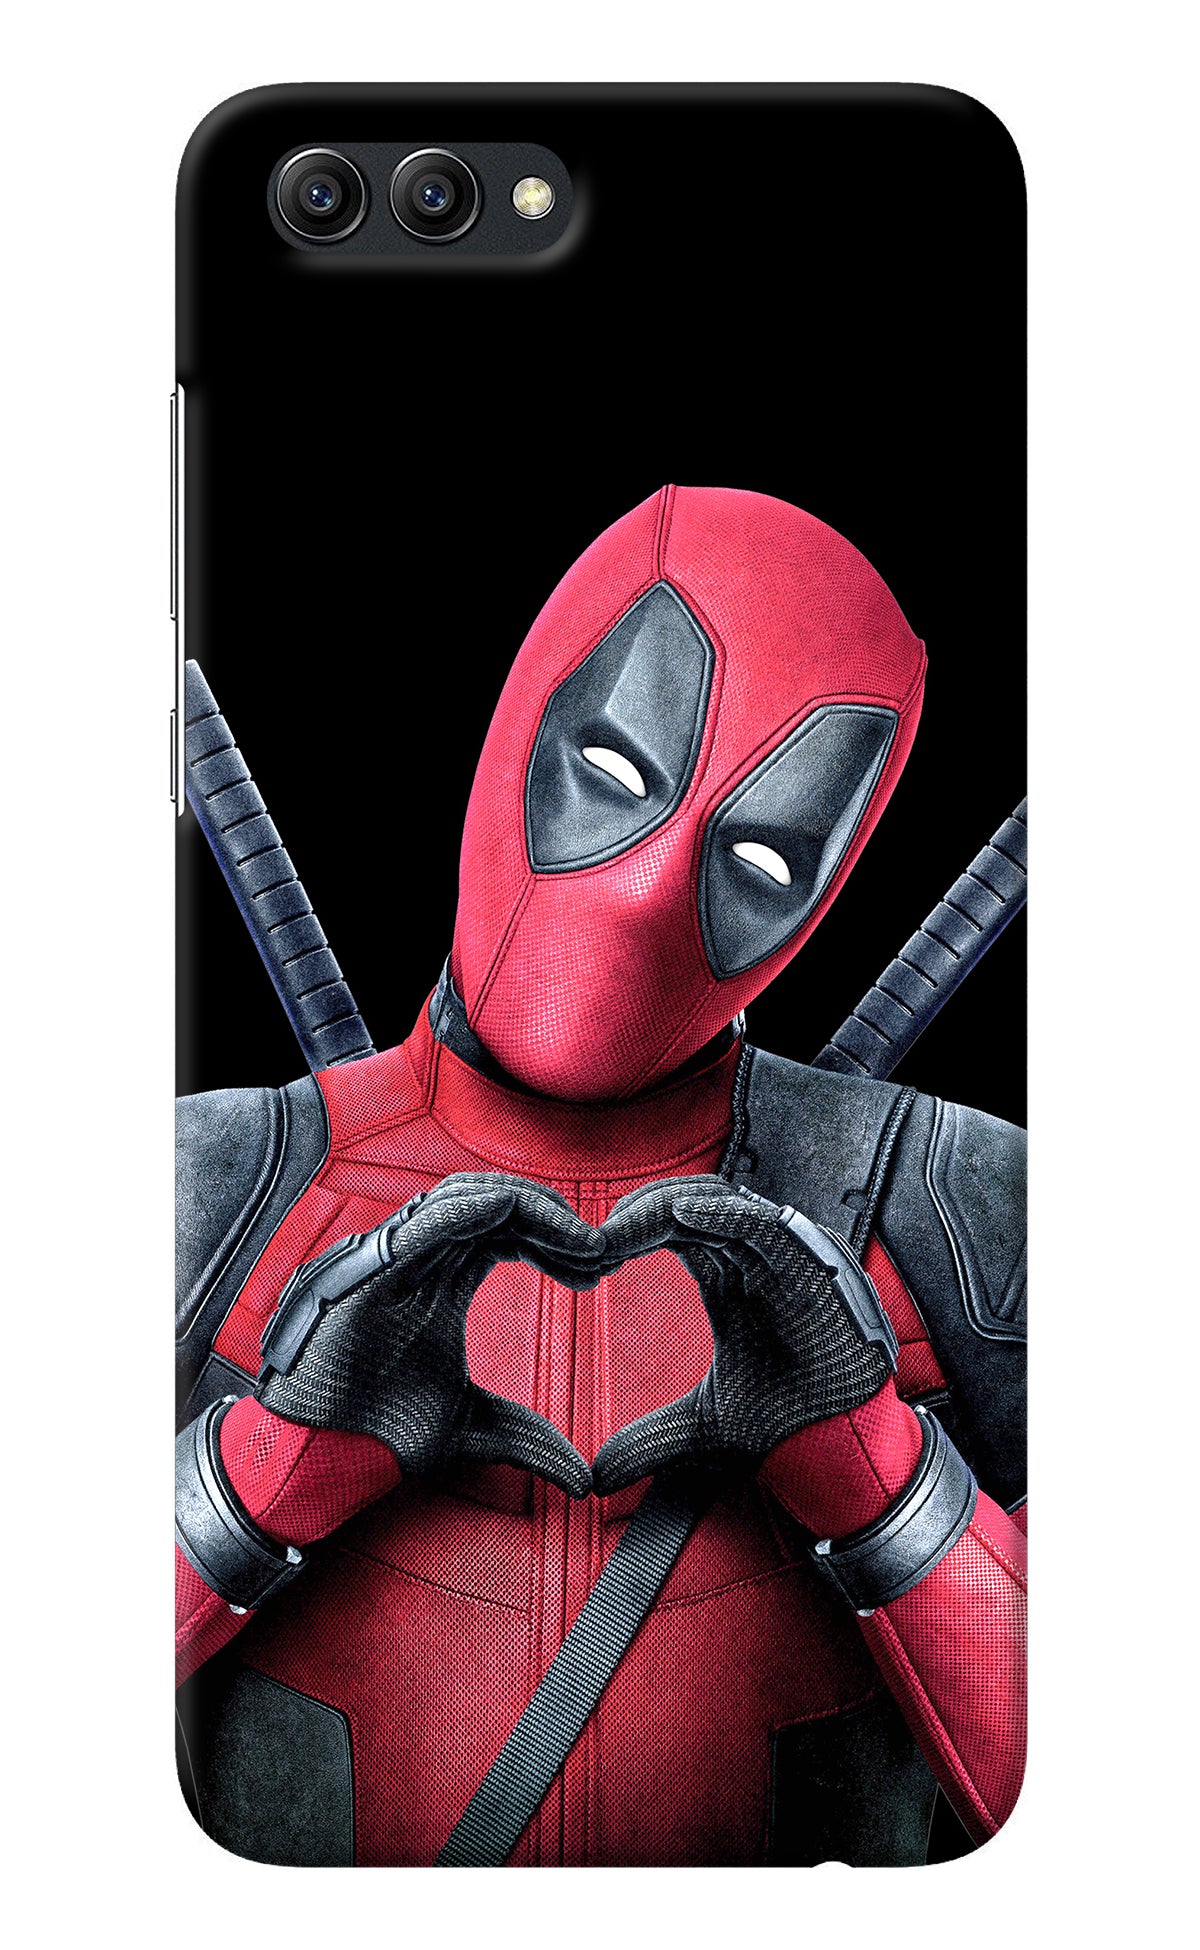 Deadpool Honor View 10 Back Cover